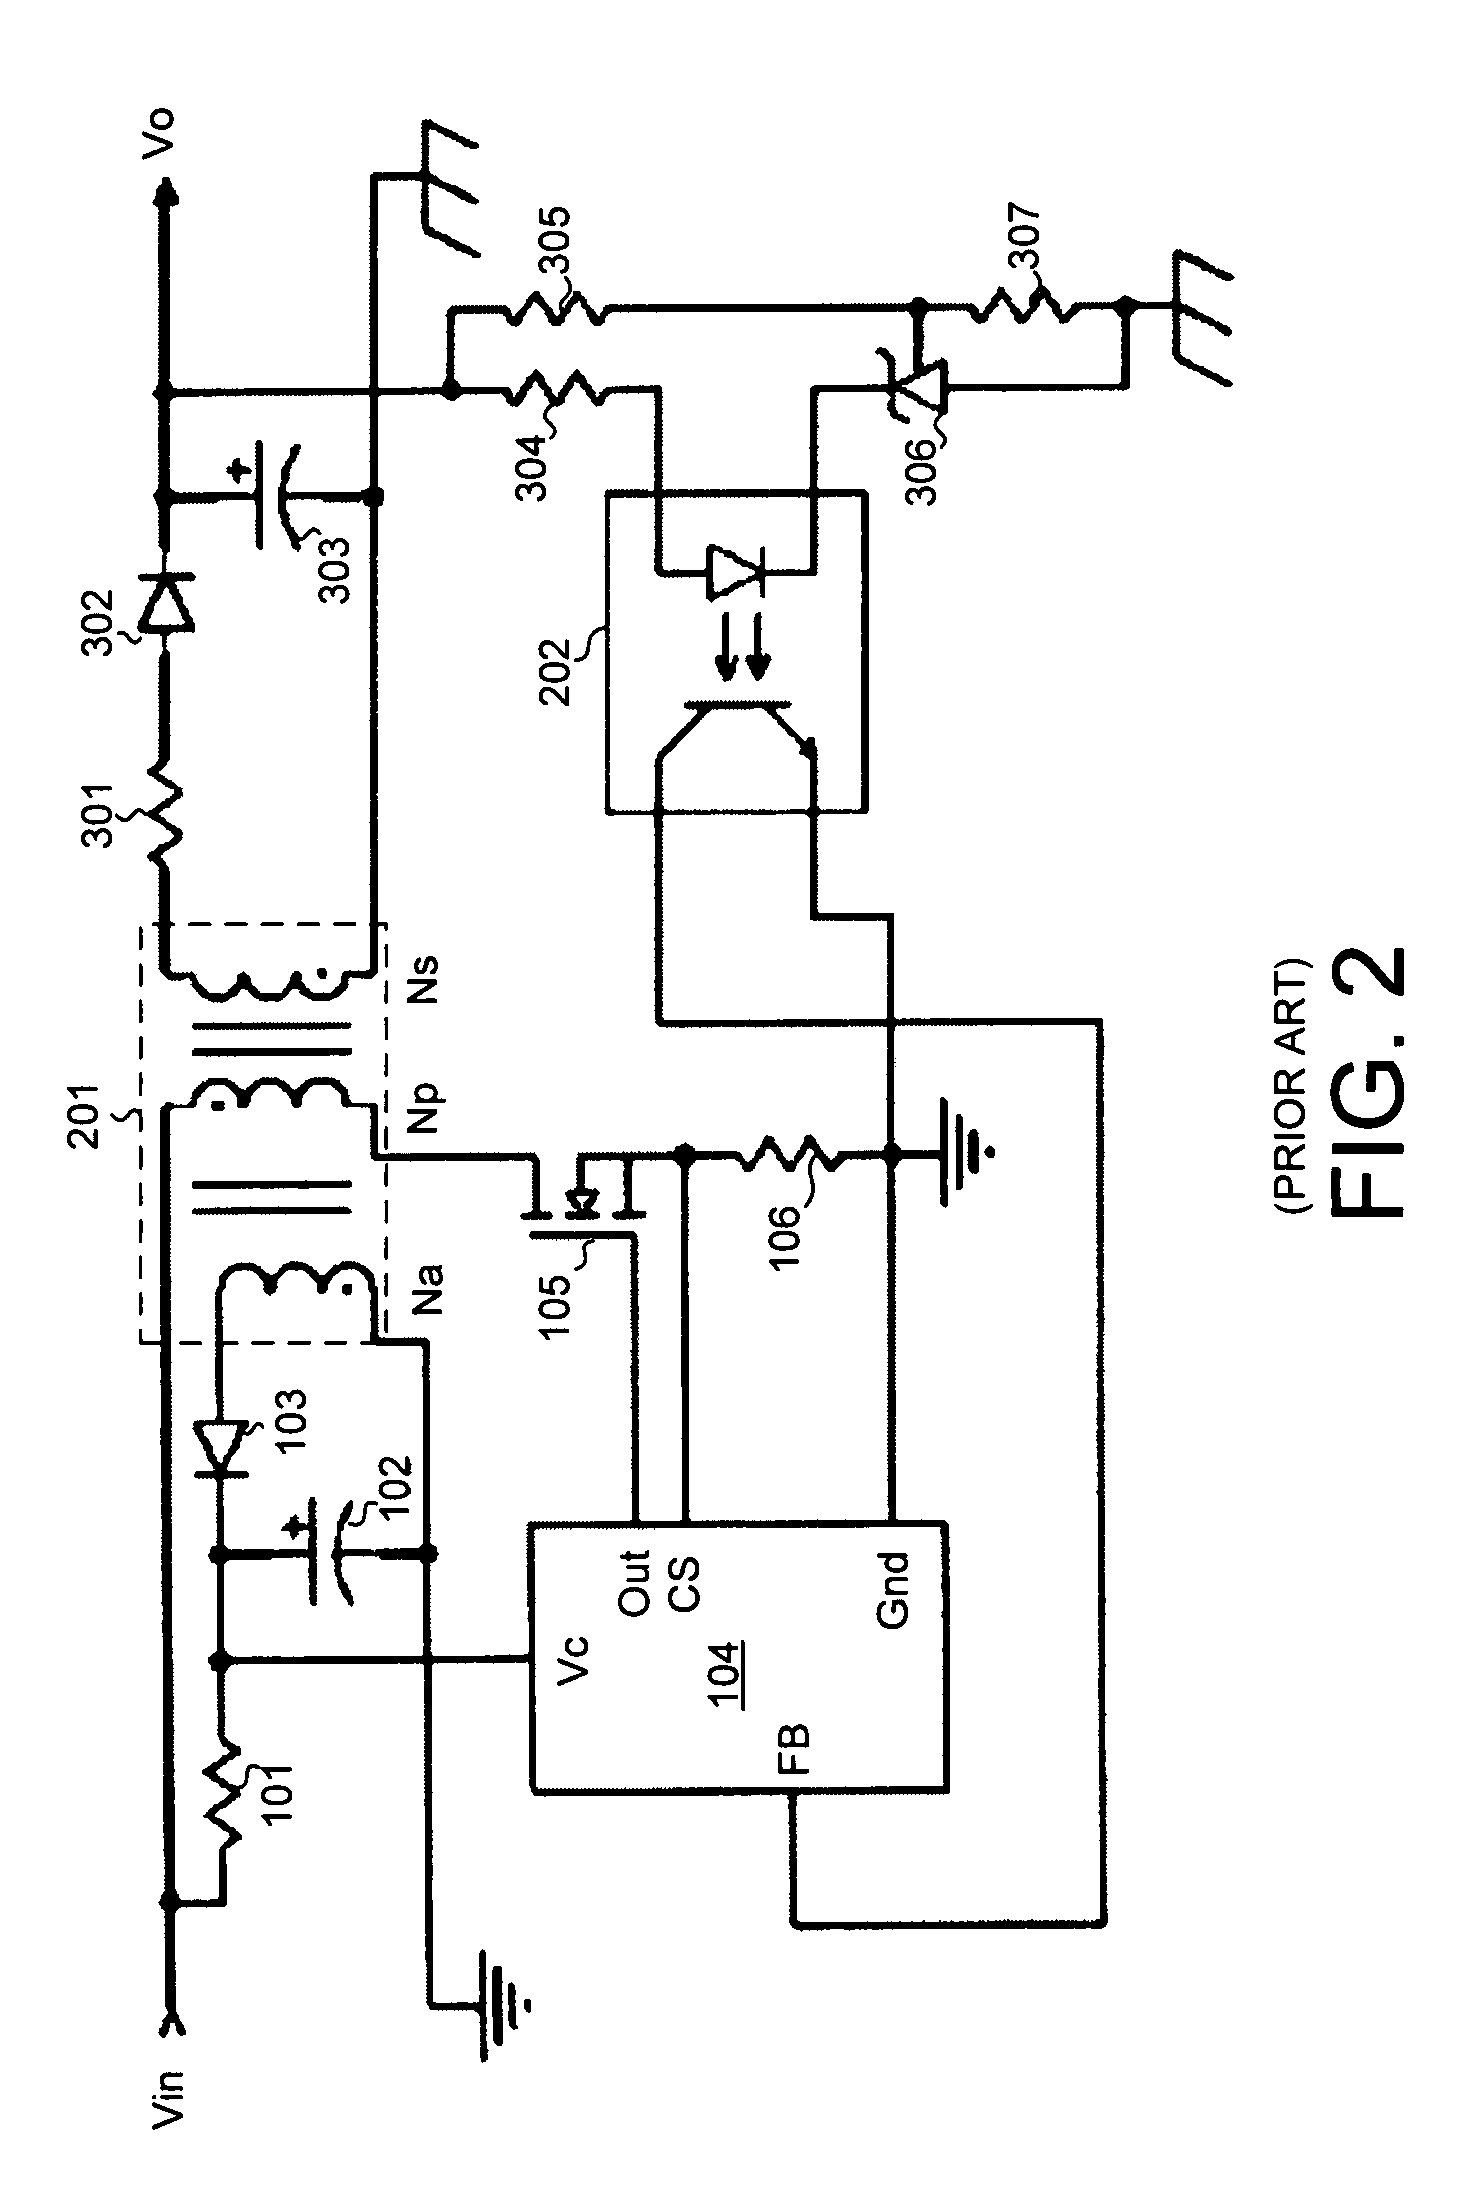 Primary side constant output voltage controller